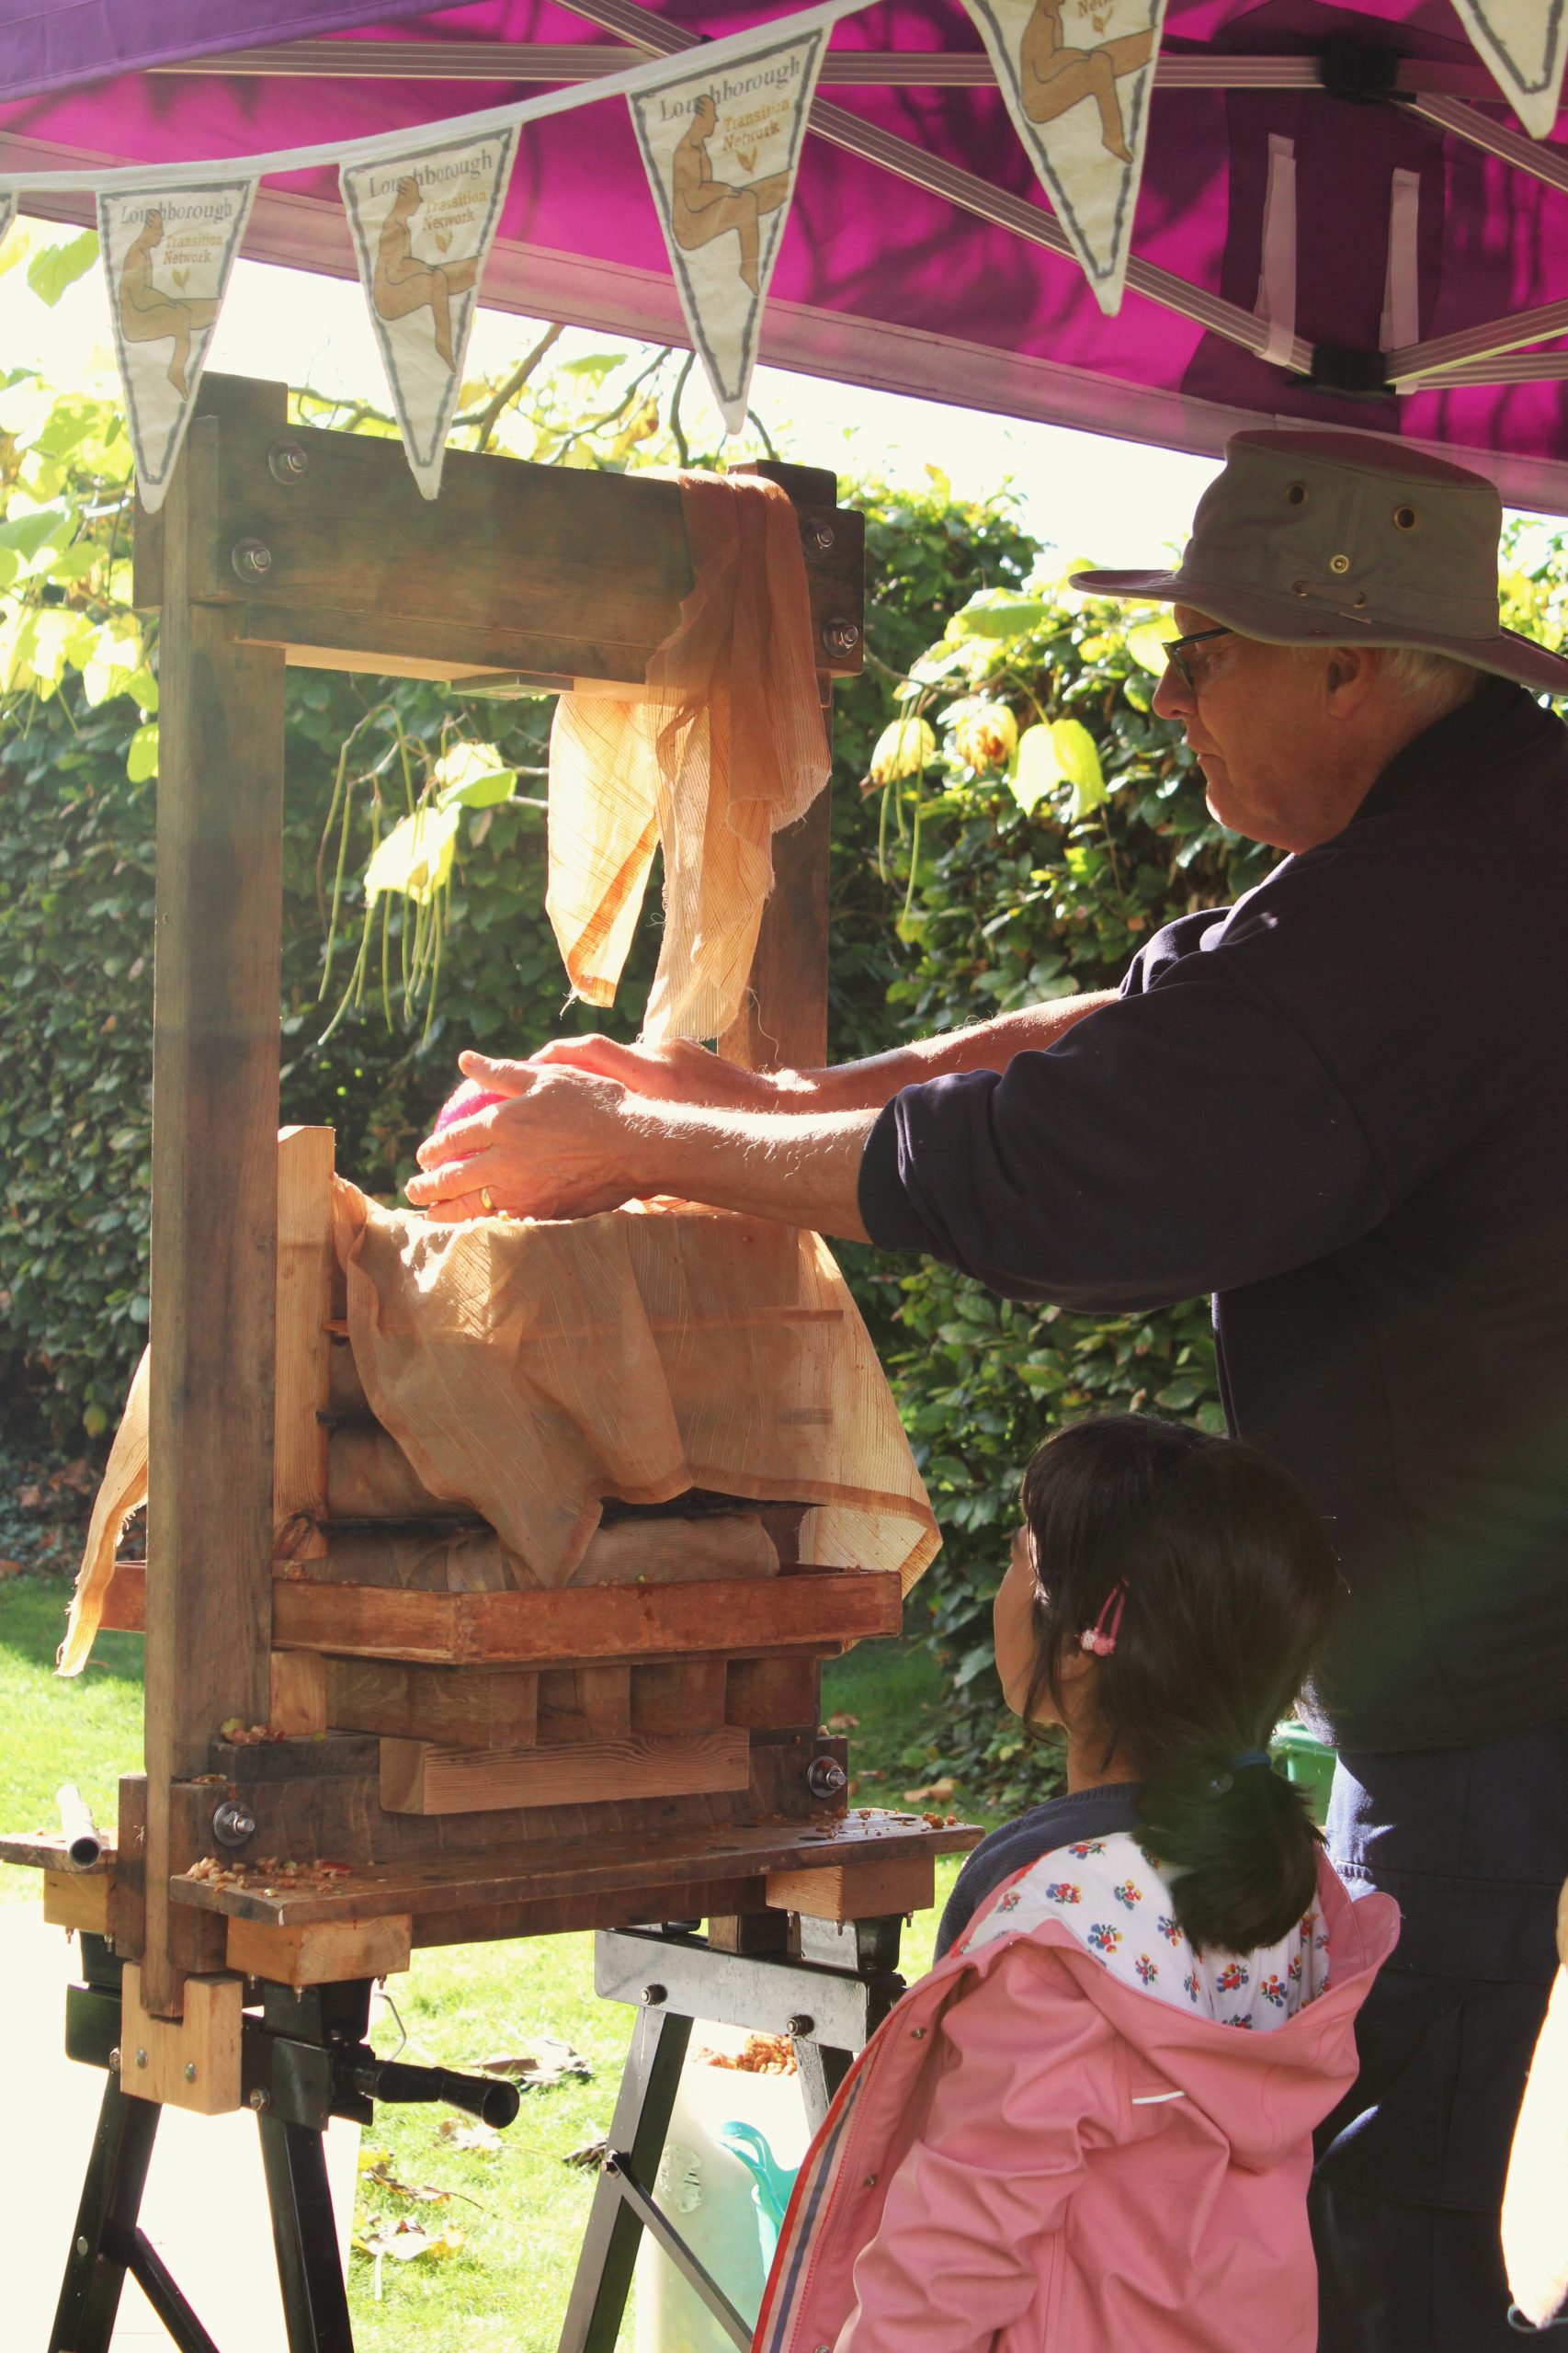 A male adult feeding apples into a wooden apple press outside while a young child looks on